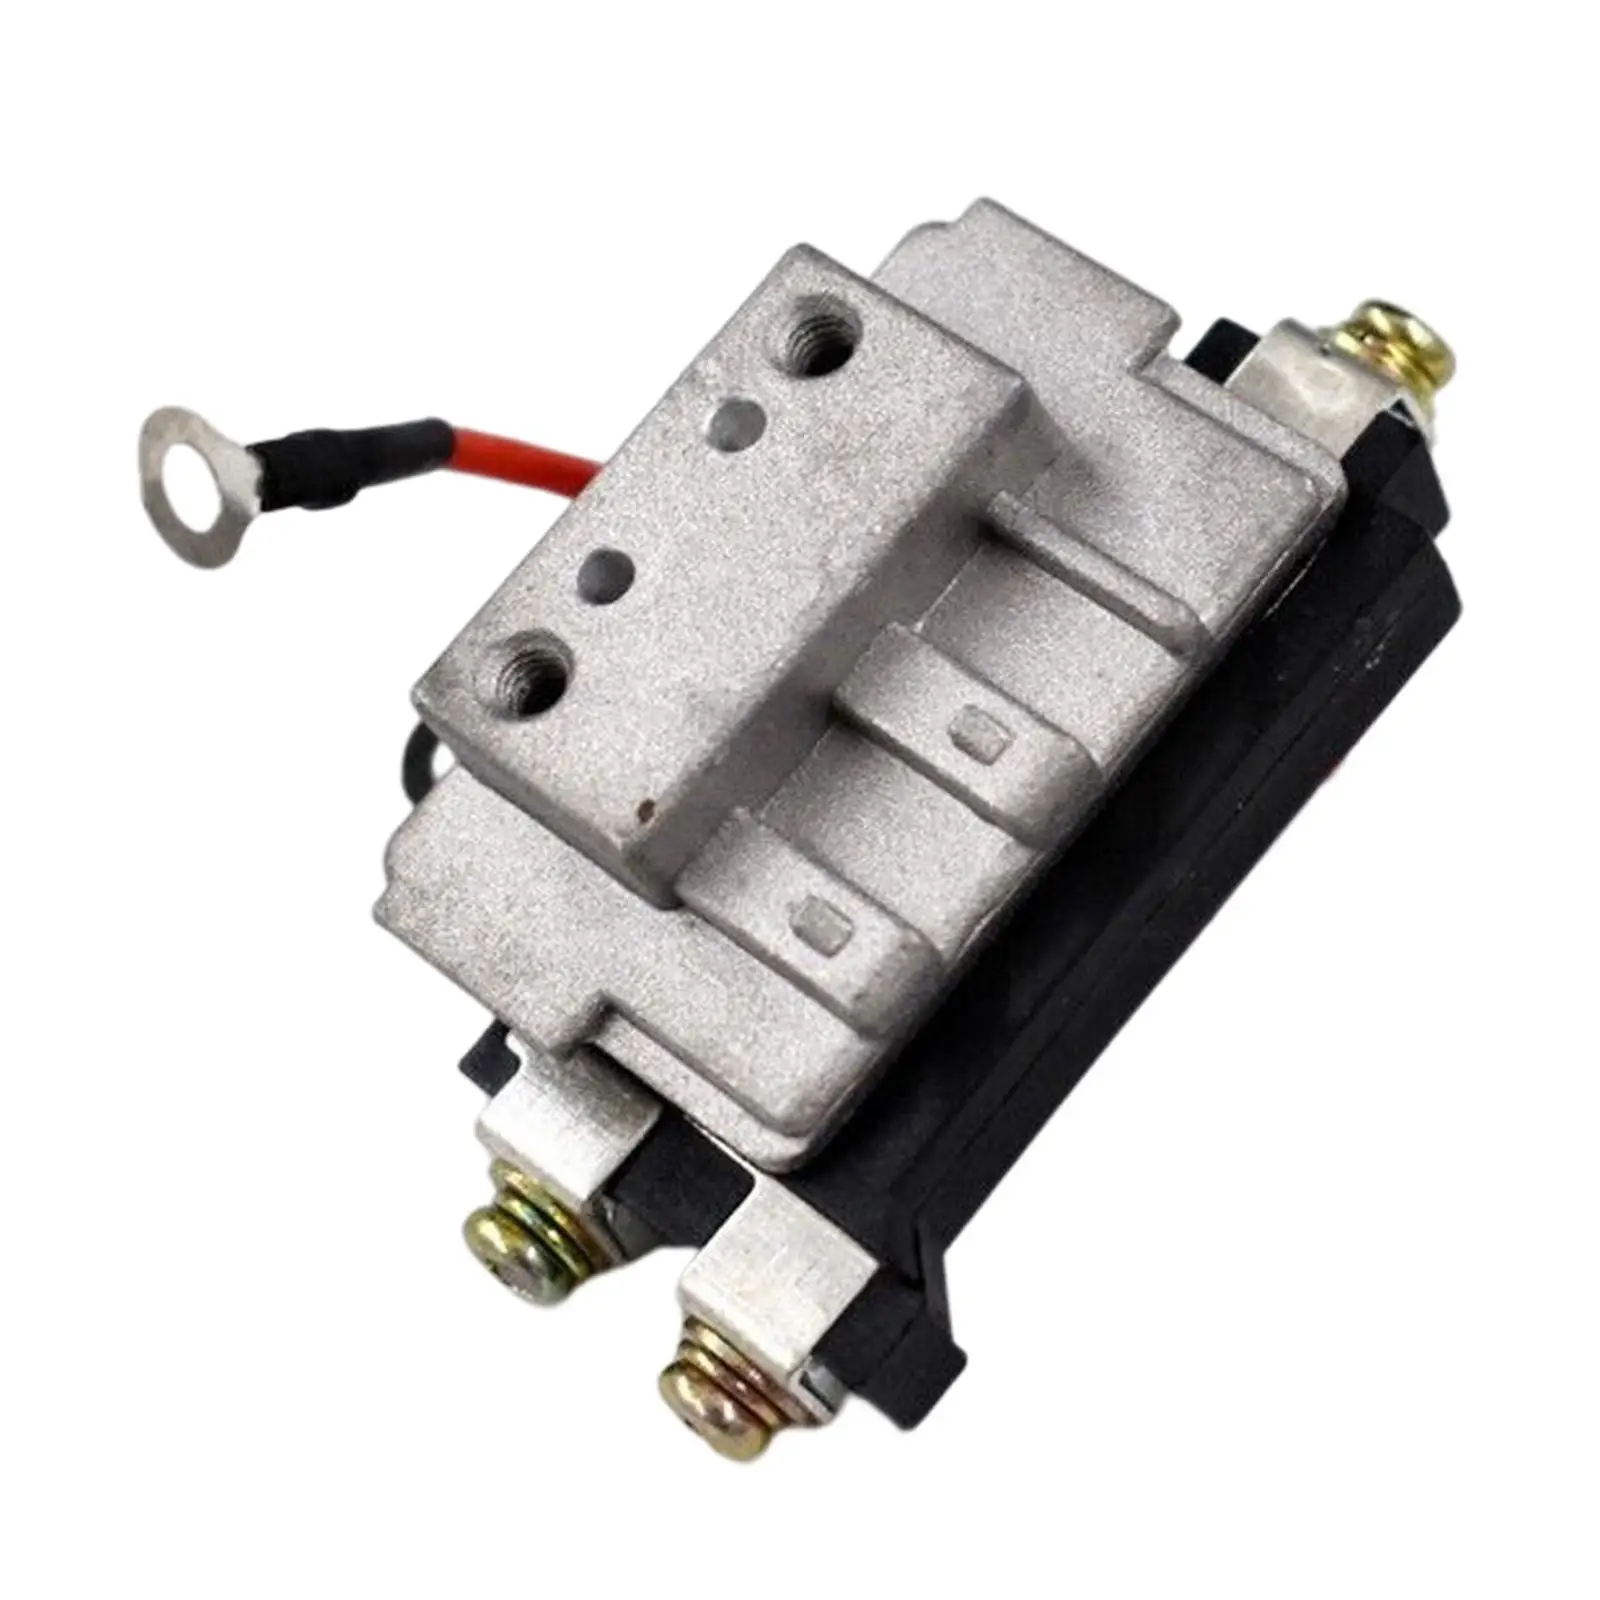 89620-12440 Ignition Control Module Replacement, Accessory, Auto Motor, Spare Parts, Durable ,Easy to Install Professional